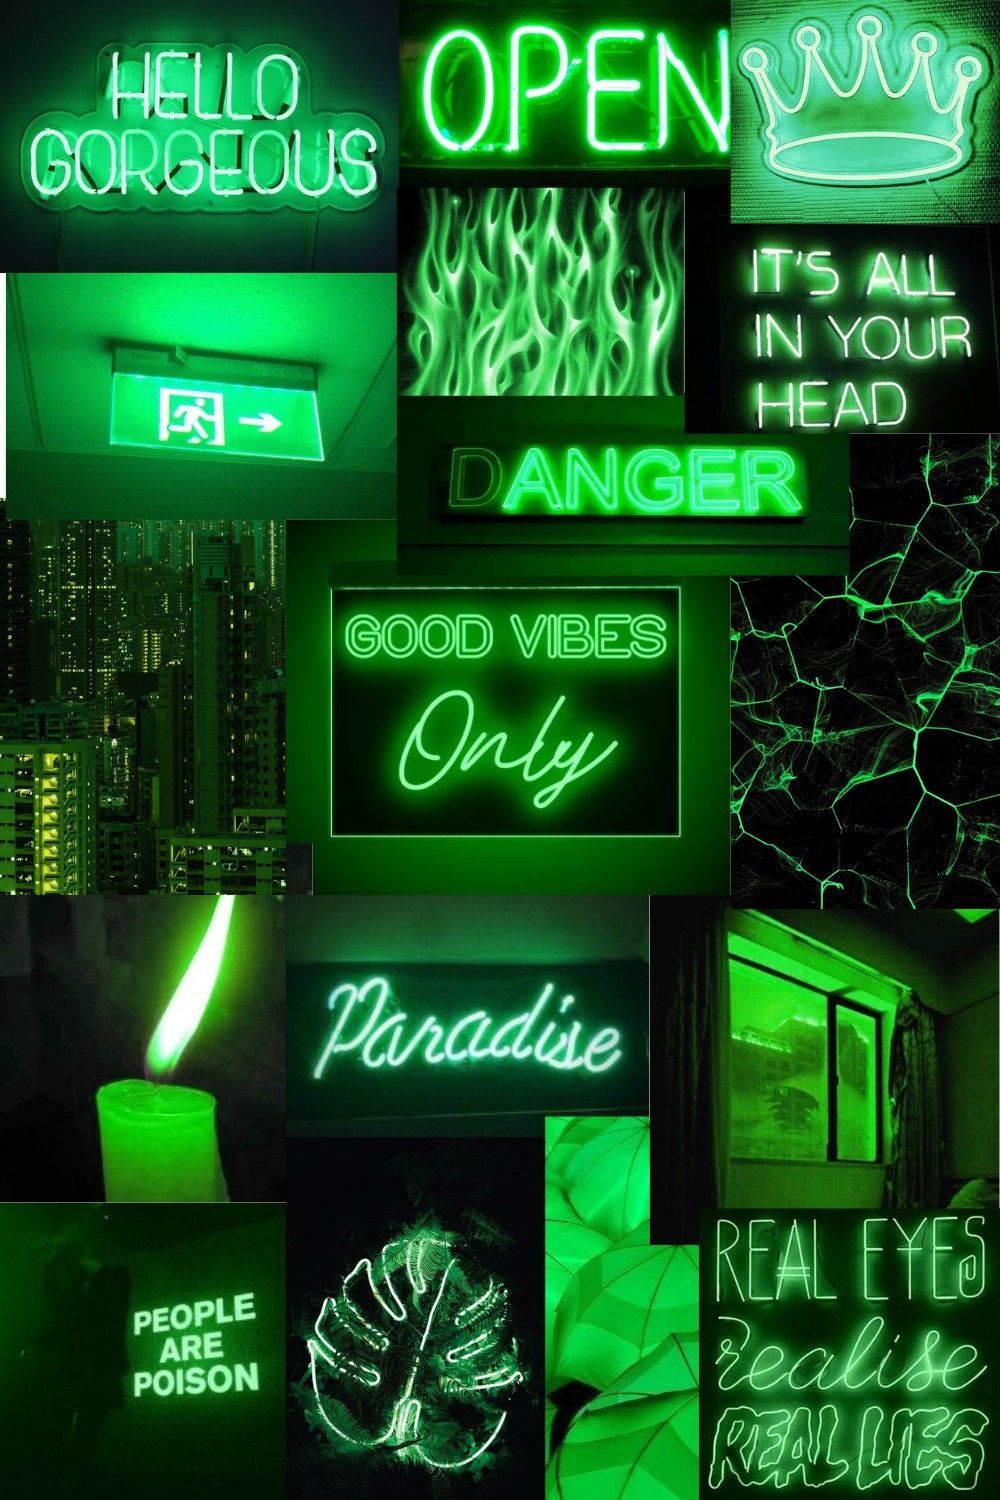 Aesthetic green neon wallpaper with different signs and quotes. Perfect for phone or desktop background.  - Lime green